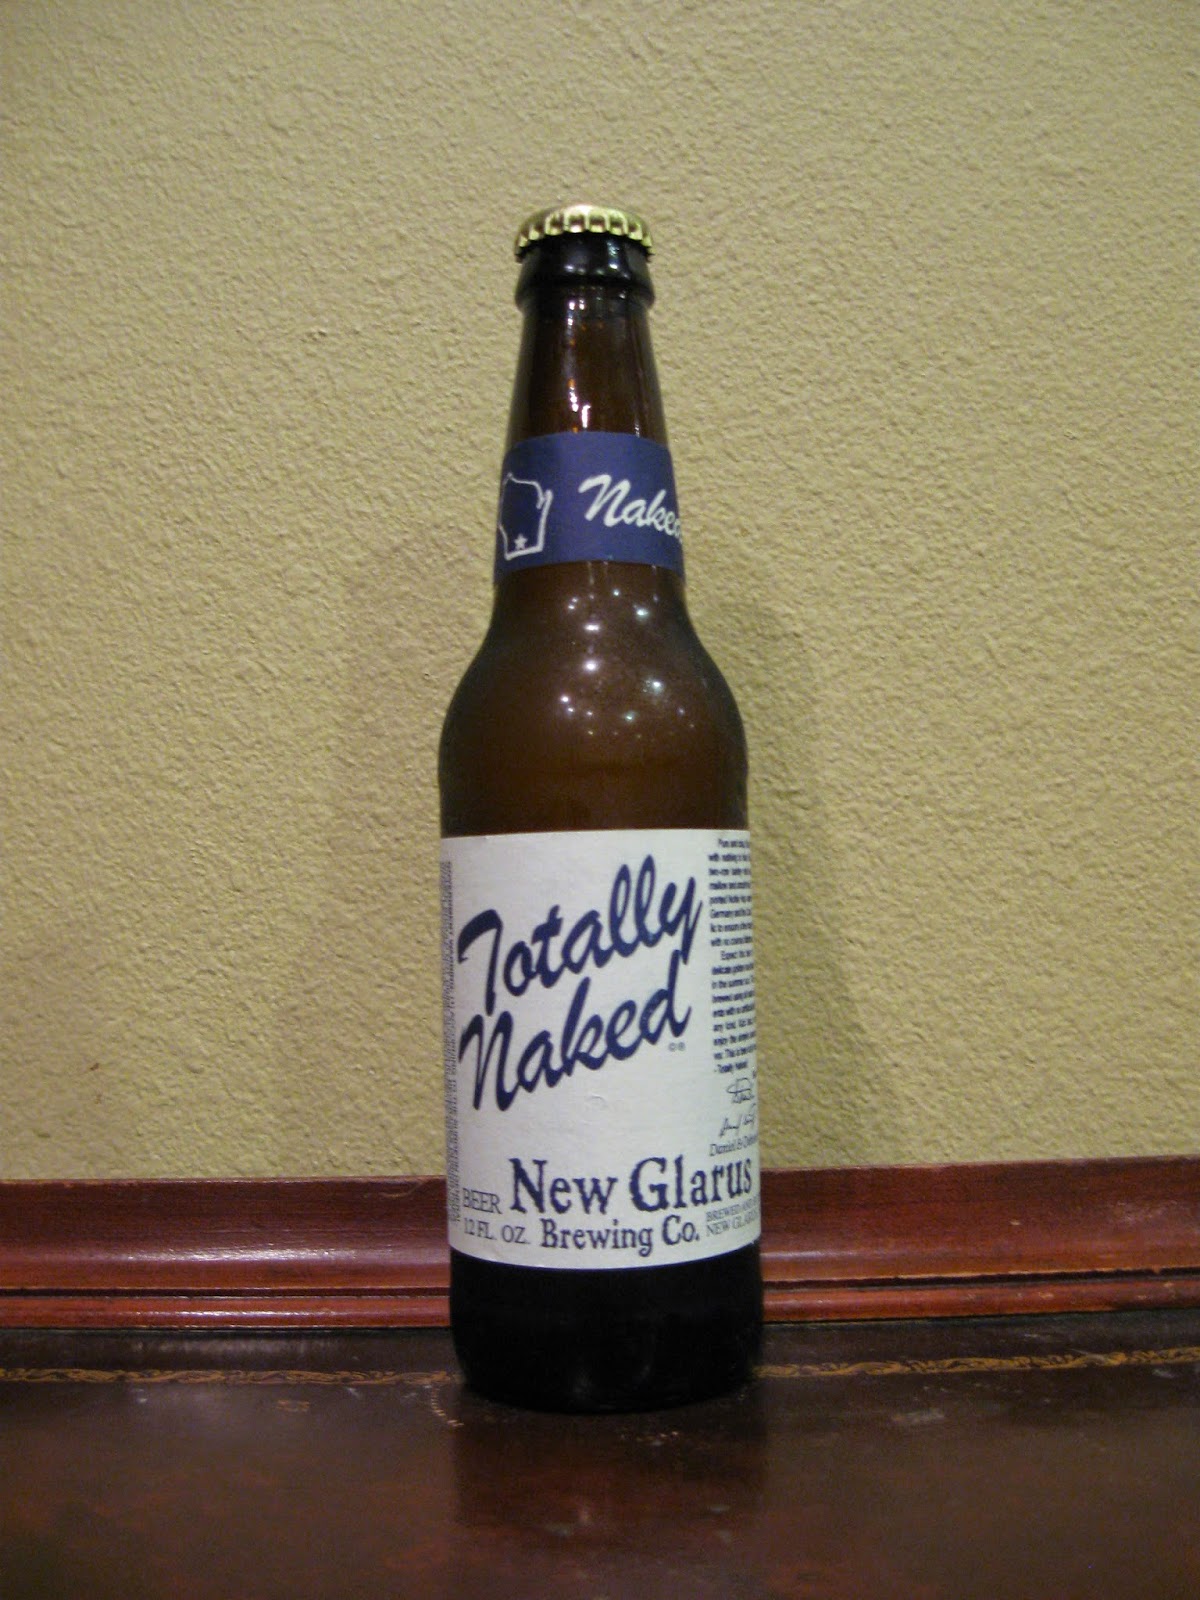 New Glarus Totally Naked Extra Pale Lager • RateBeer